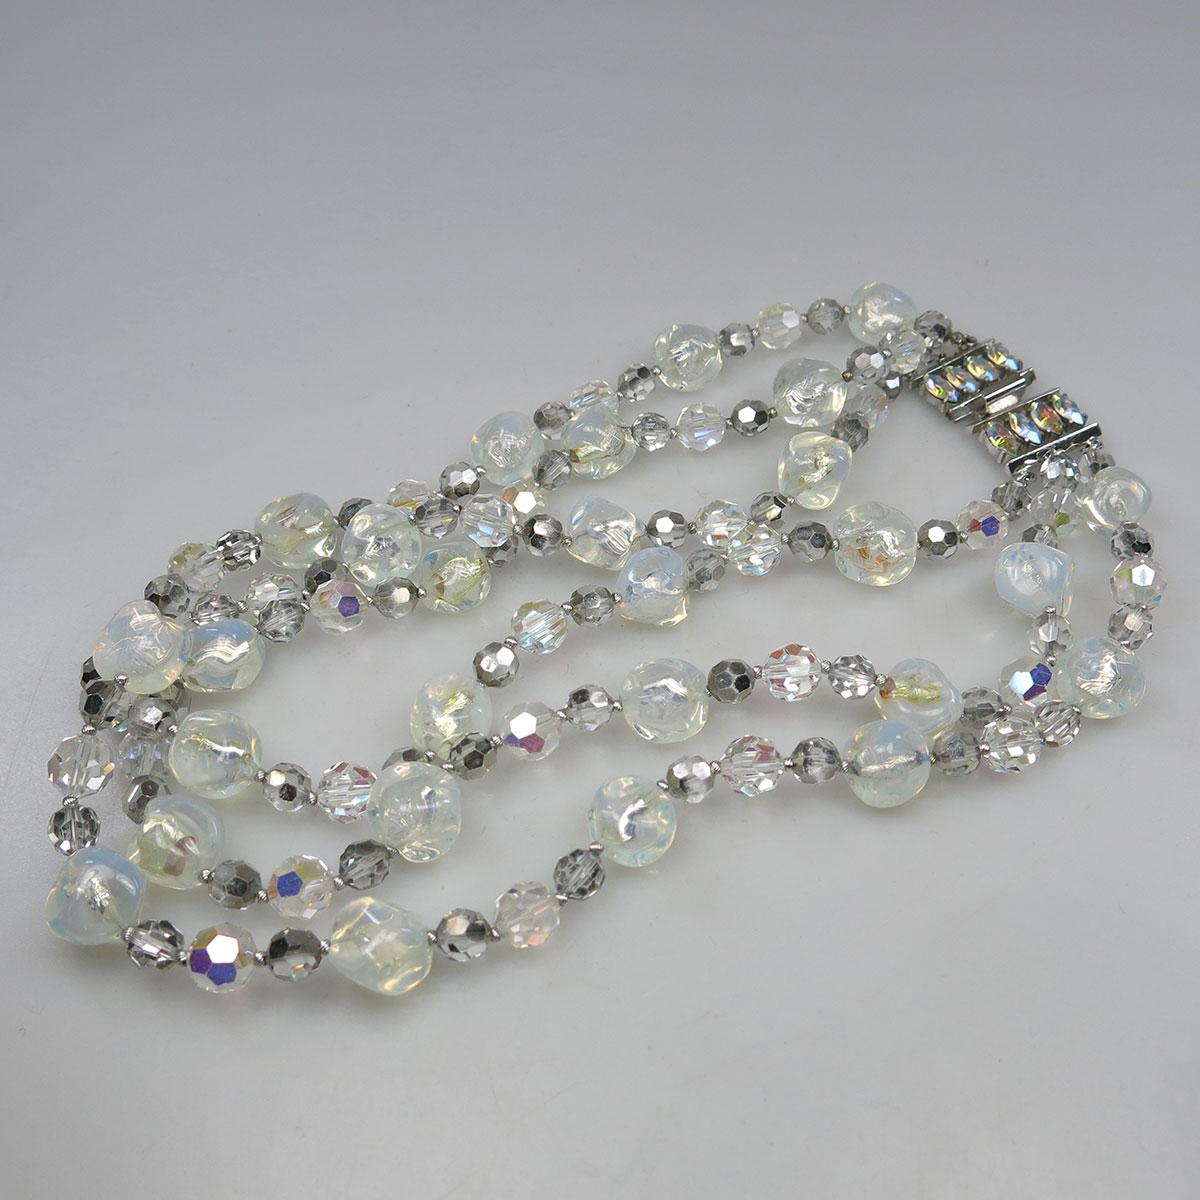 Sherman Triple Strand Smokey And Opalescent Glass Bead Necklace